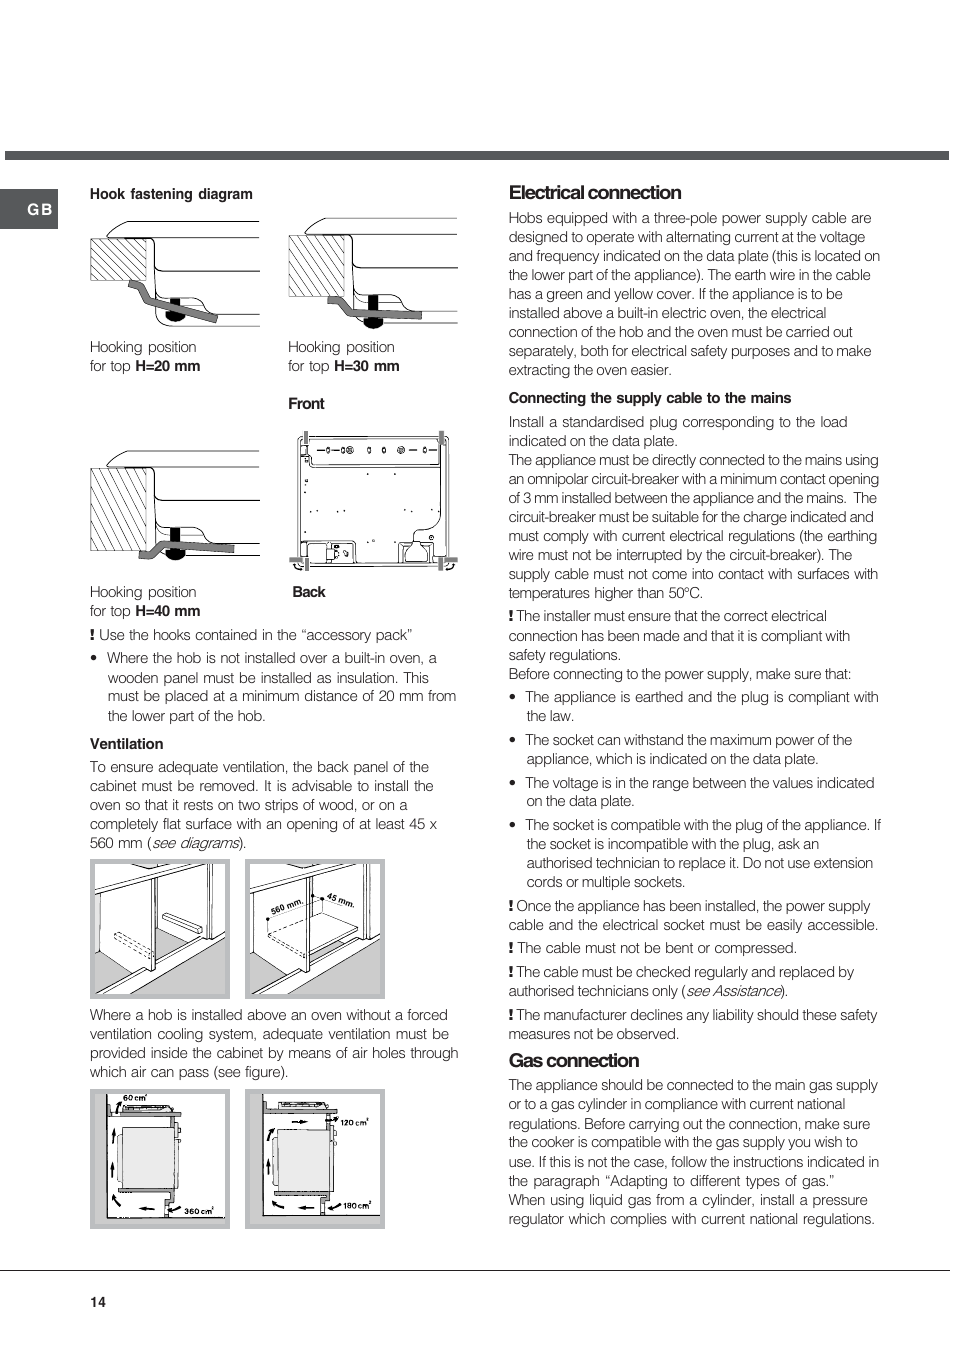 Electrical connection, Gas connection | Hotpoint Ariston TD 640 S (ICE) IX-HA User Manual | Page 14 / 56